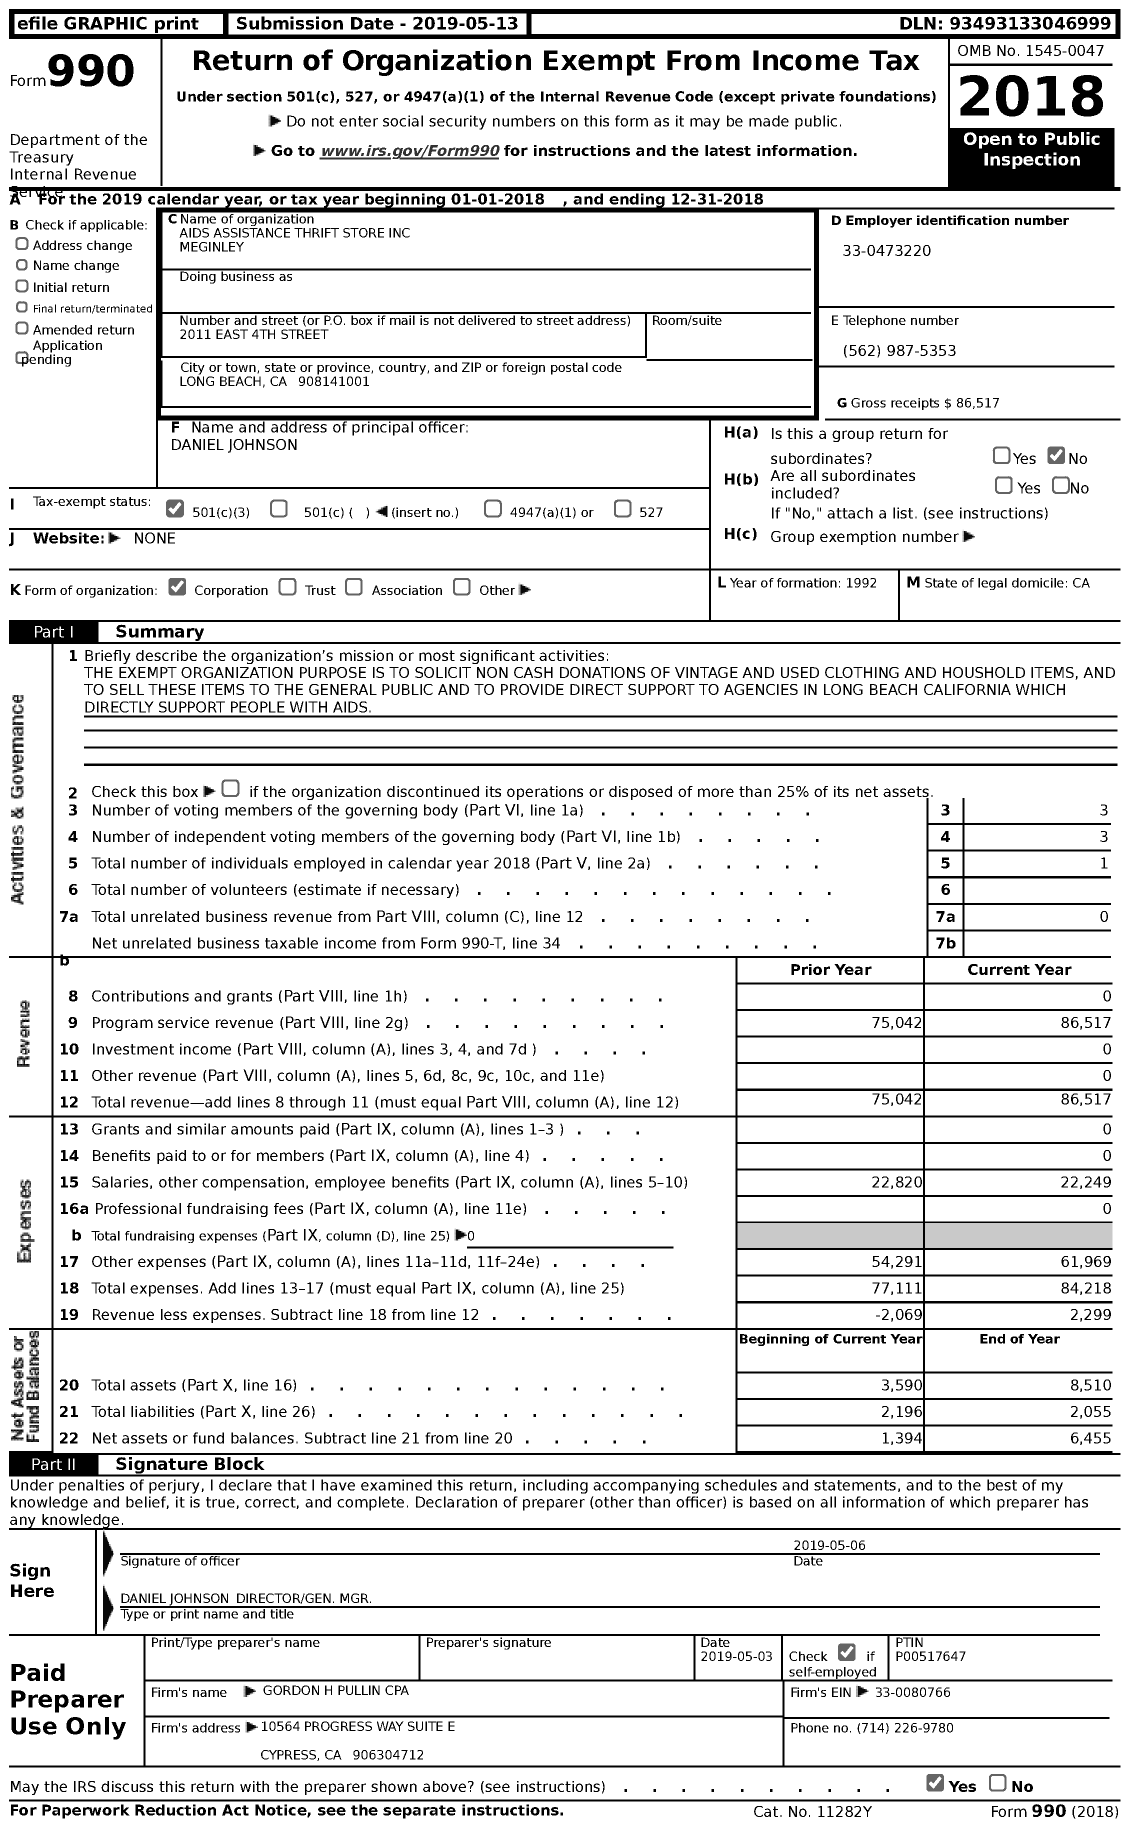 Image of first page of 2018 Form 990 for Aids Assistance Thrift Store